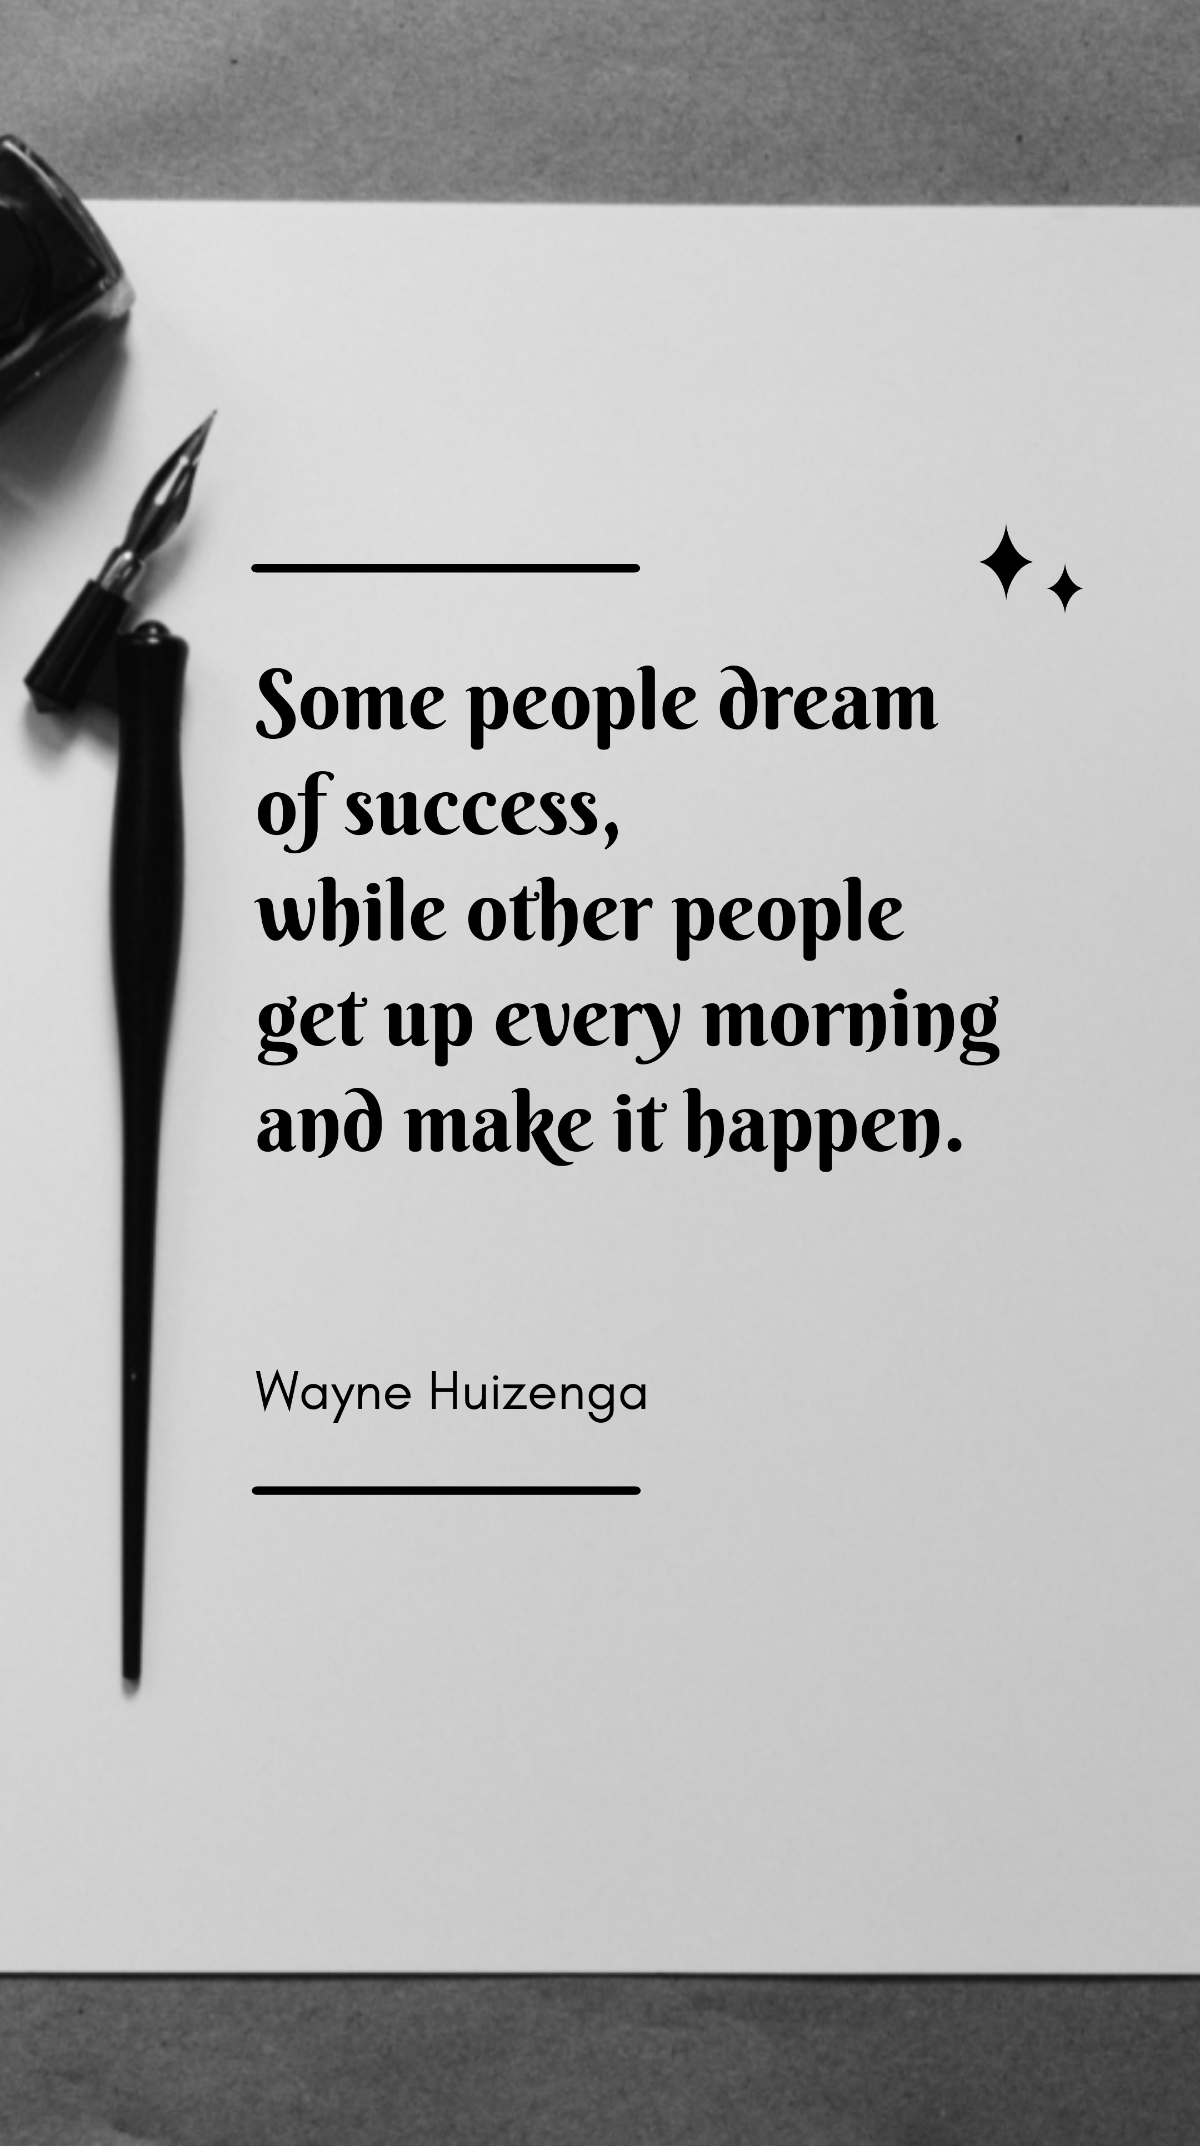 Wayne Huizenga - Some people dream of success, while other people get up every morning and make it happen. Template